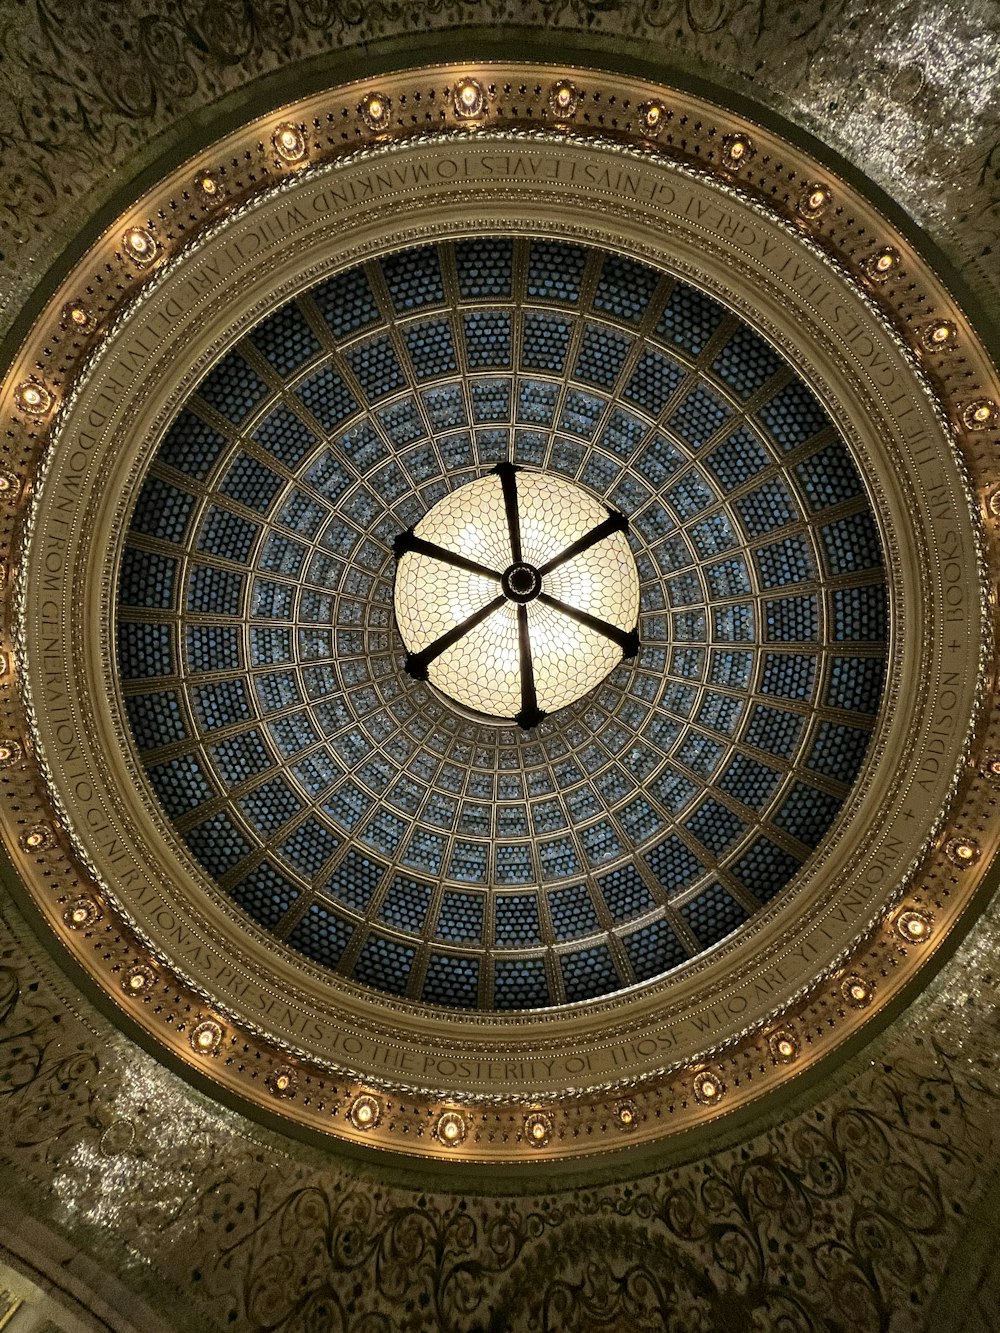 a circular ceiling with a clock